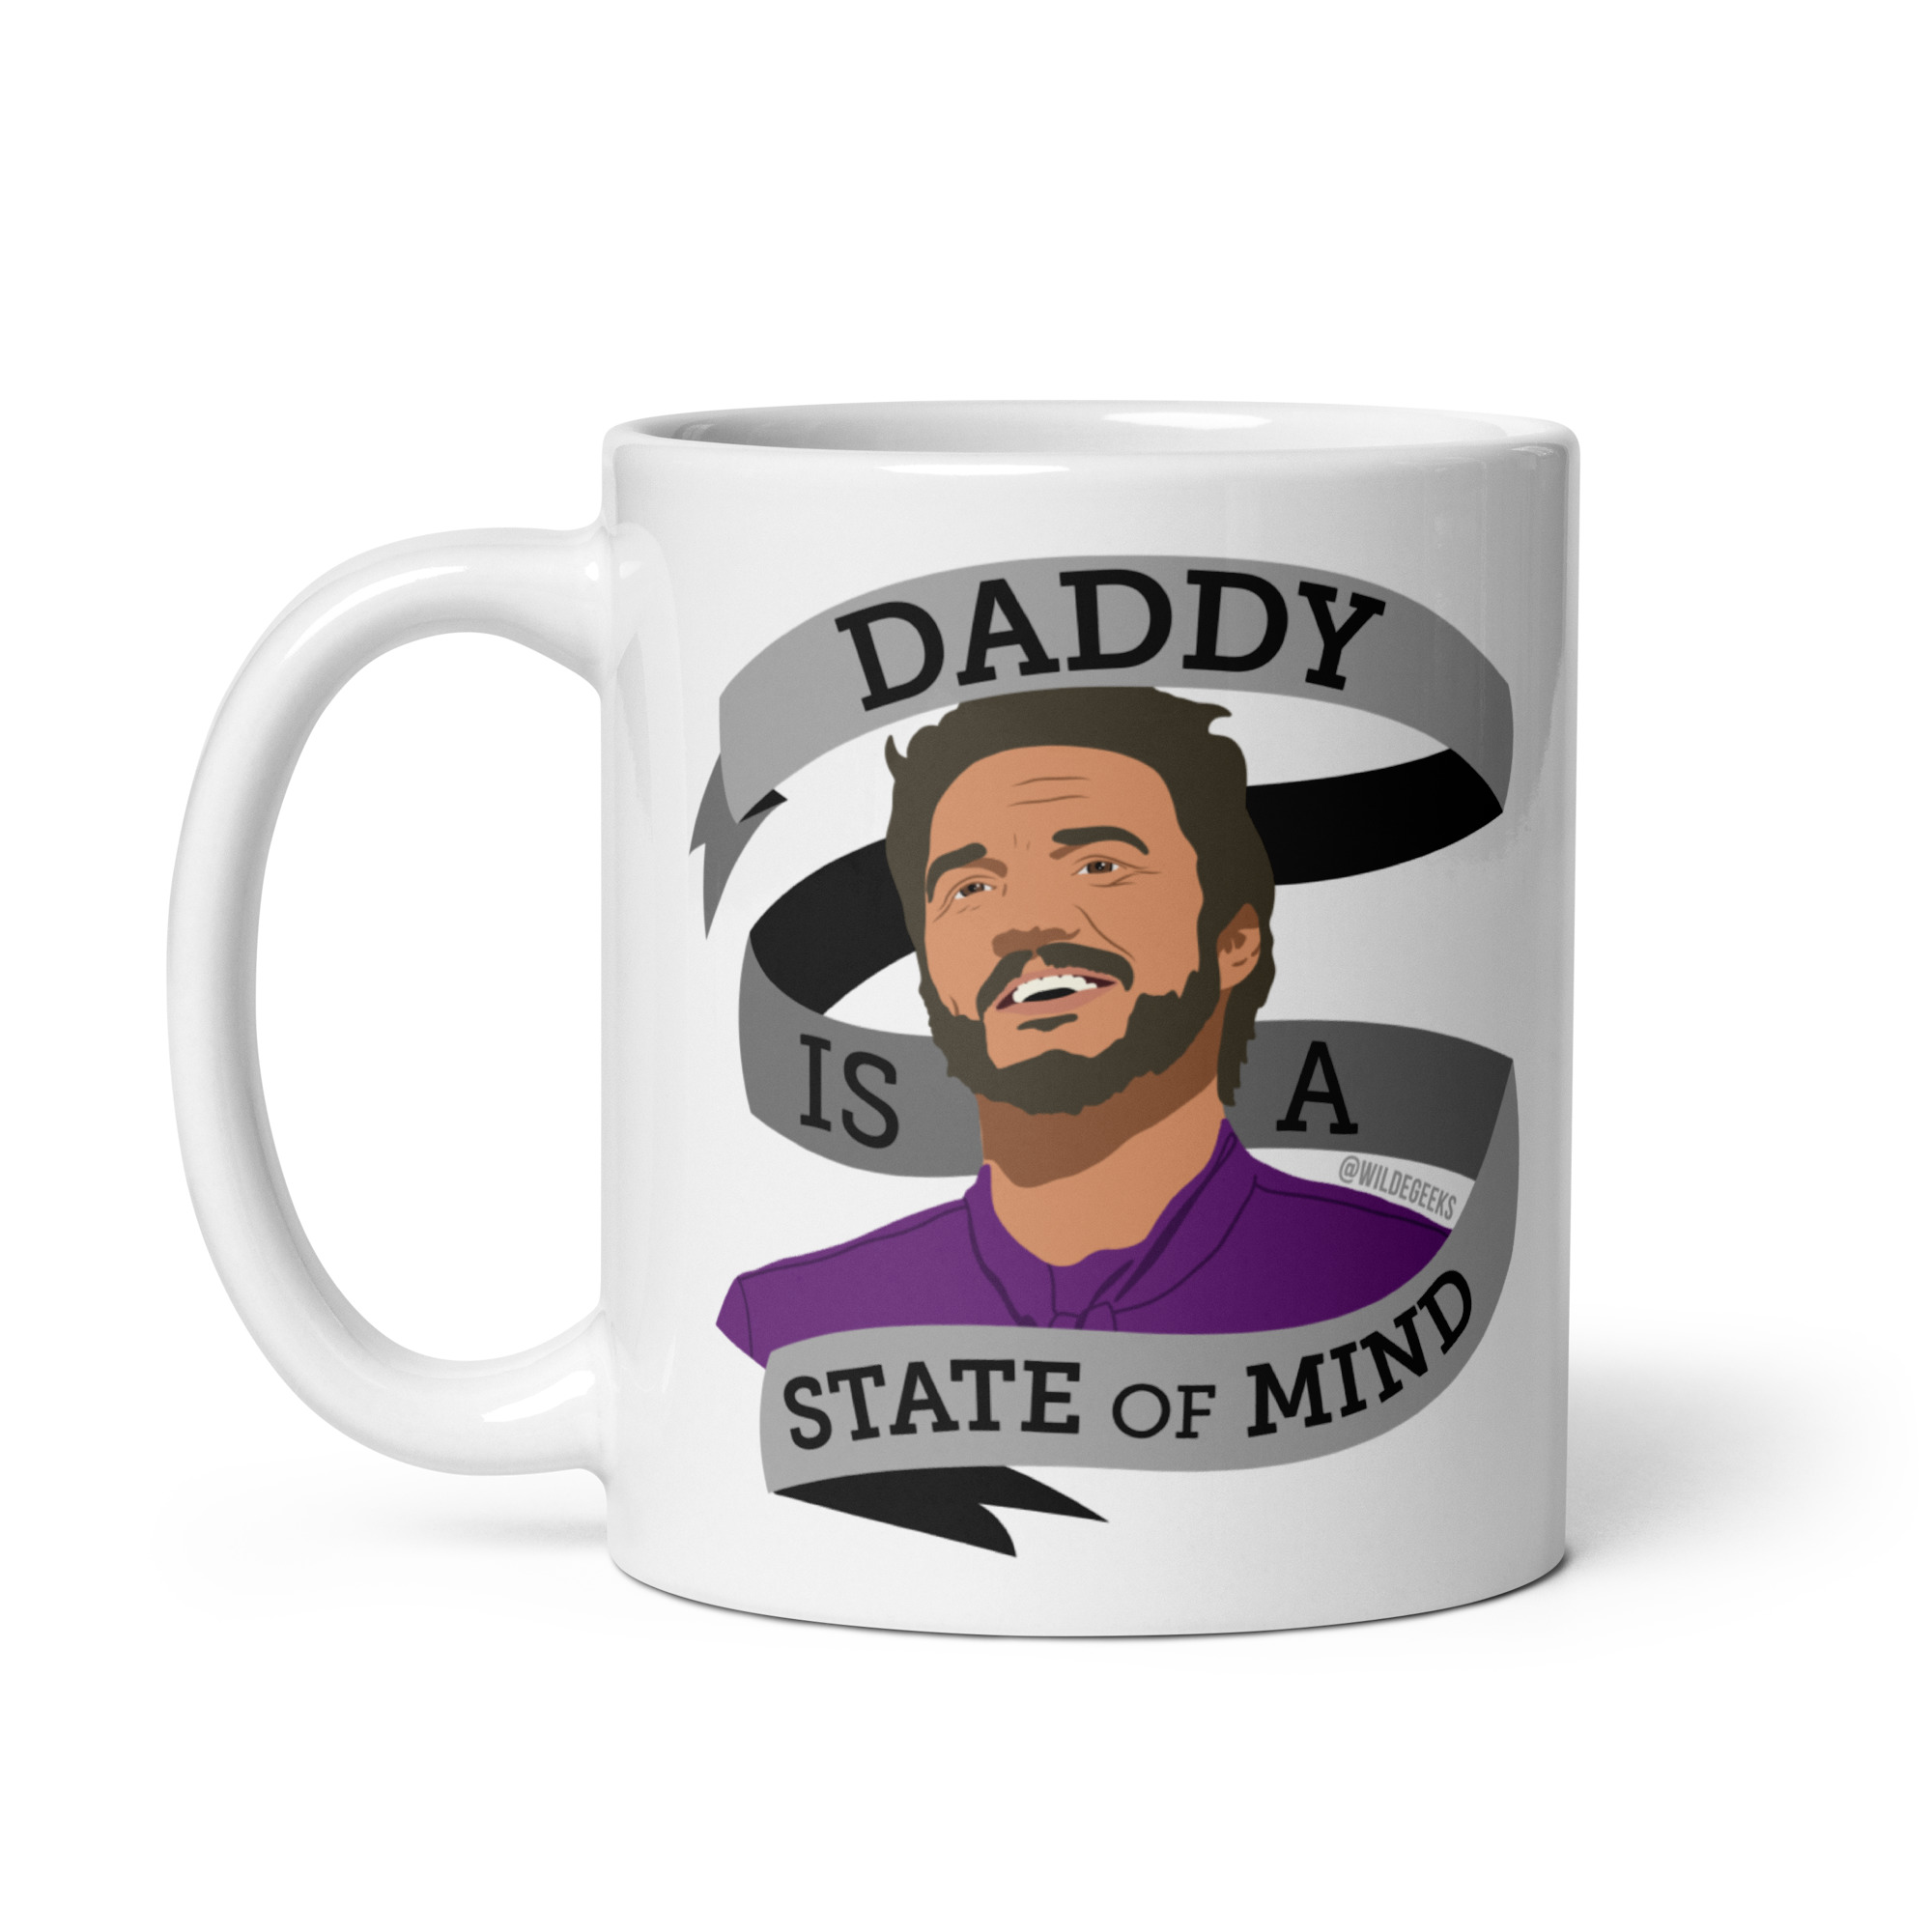 Daddy is a State of Mind Mug by Wilde Designs